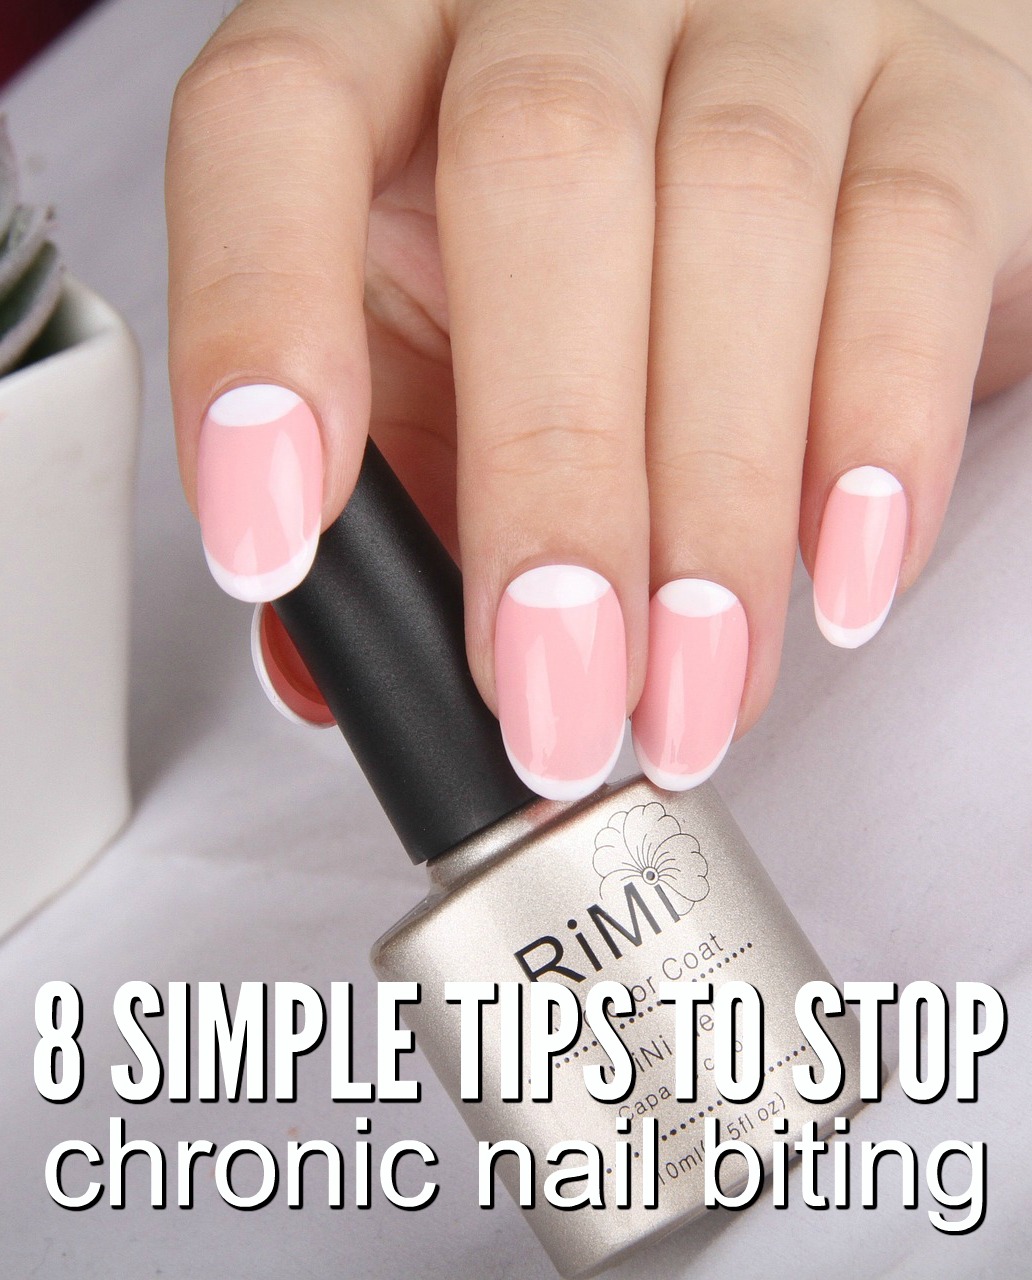 Stop Biting Your Nails Fast With These Simple Tips